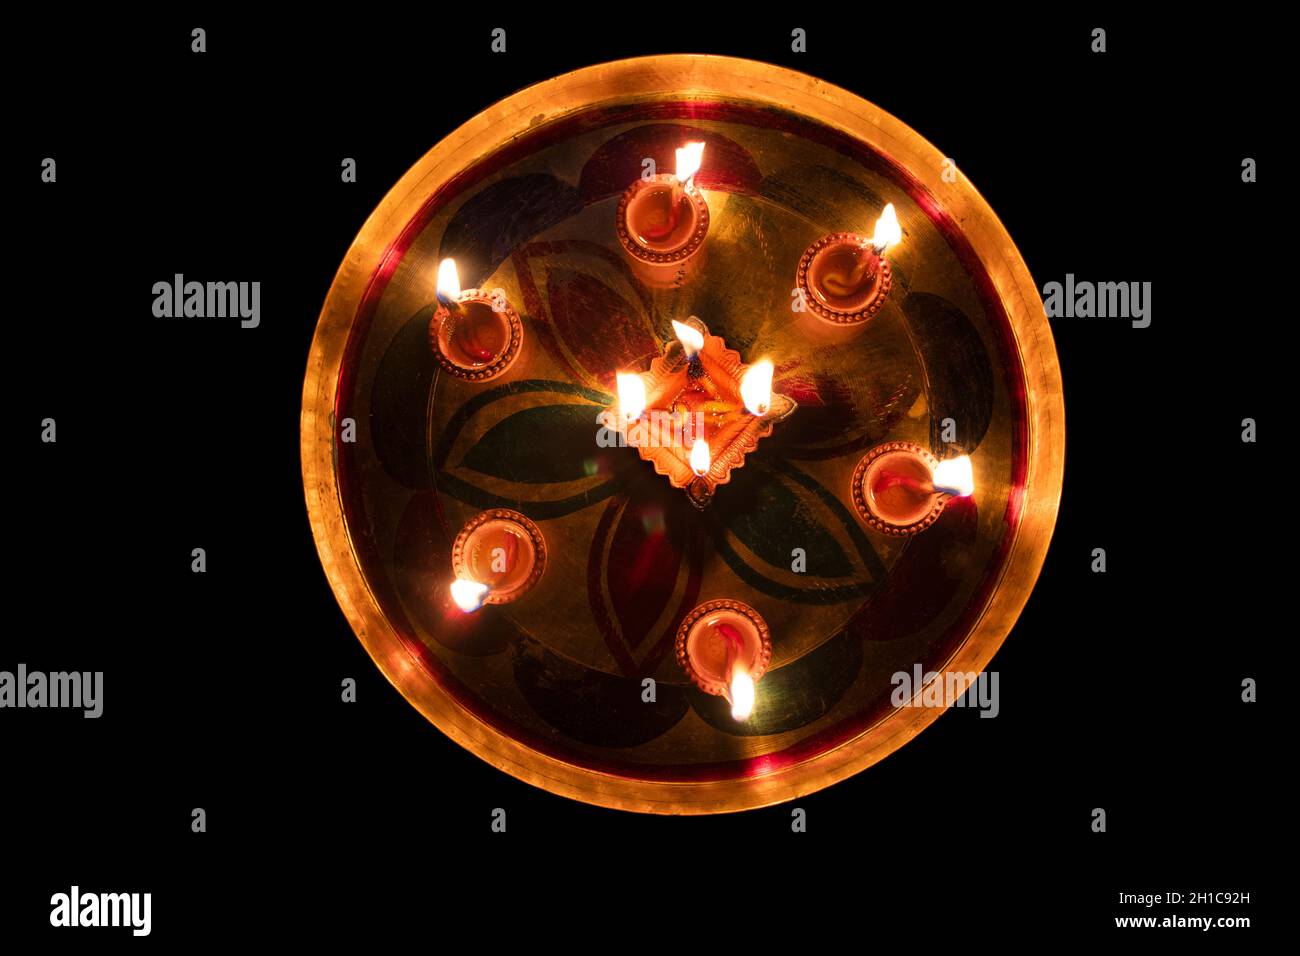 High Angle View Of Lit Diyas In Plate On Floor Stock Photo